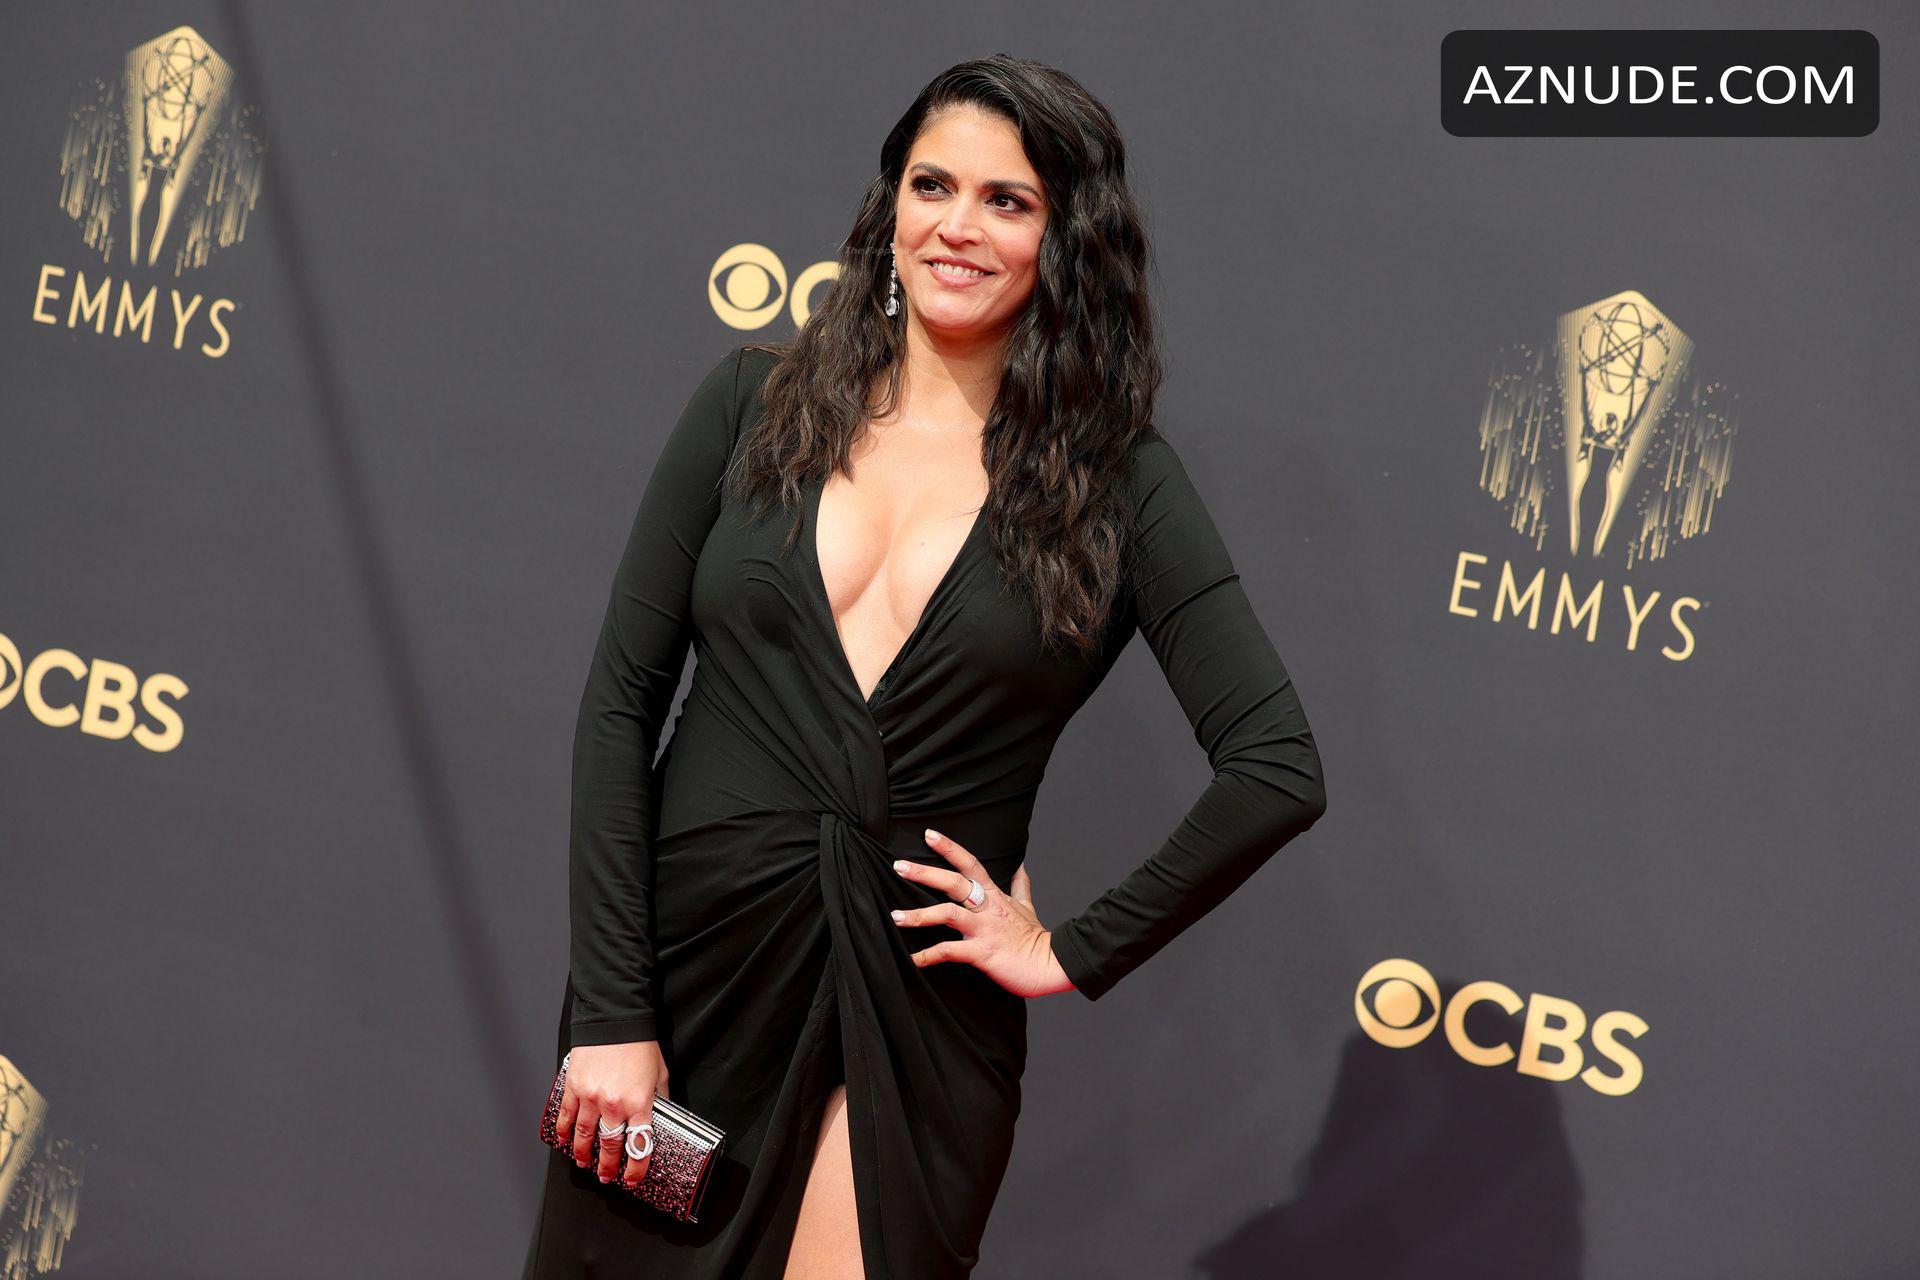 Cecily strong nsfw